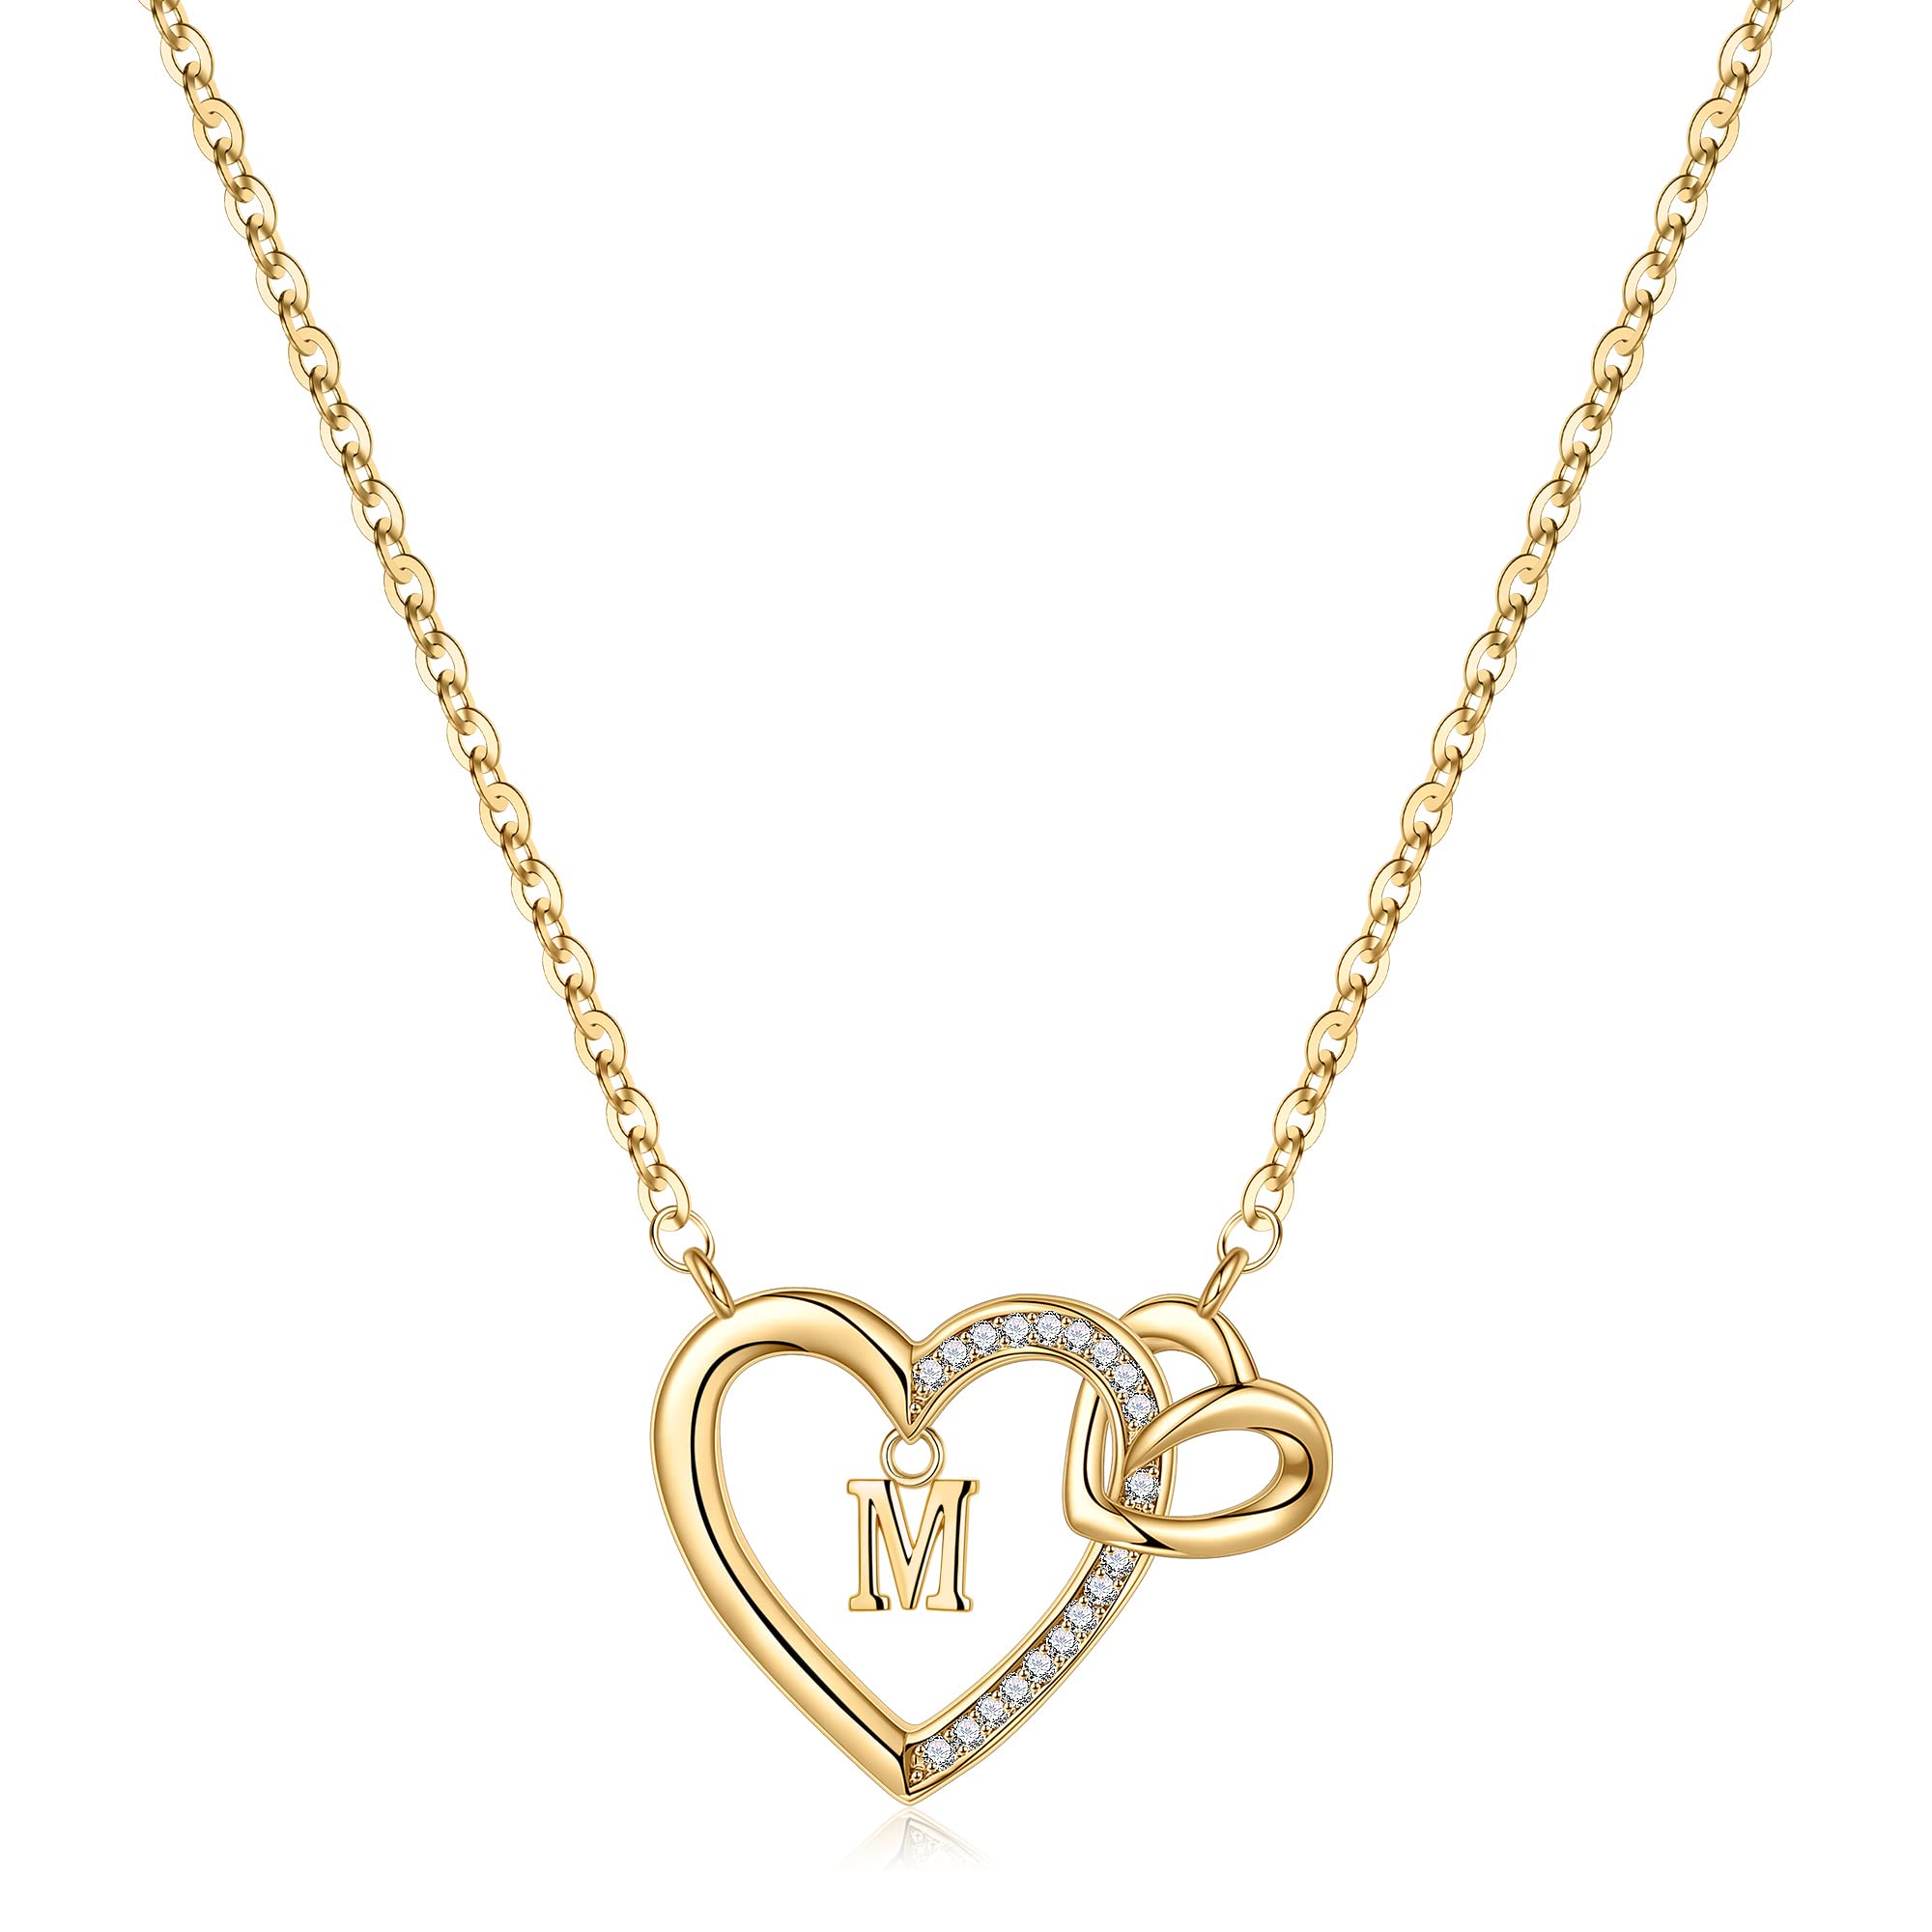 CZ Heart Initial Necklaces for Women Girls, 14K Real Gold Plated Heart pendant Letter Necklace for Women Teen Girls Jewelry Dainty Gold Birthday Mothers Day Valentines Gifts for Women Girls Teen Girls